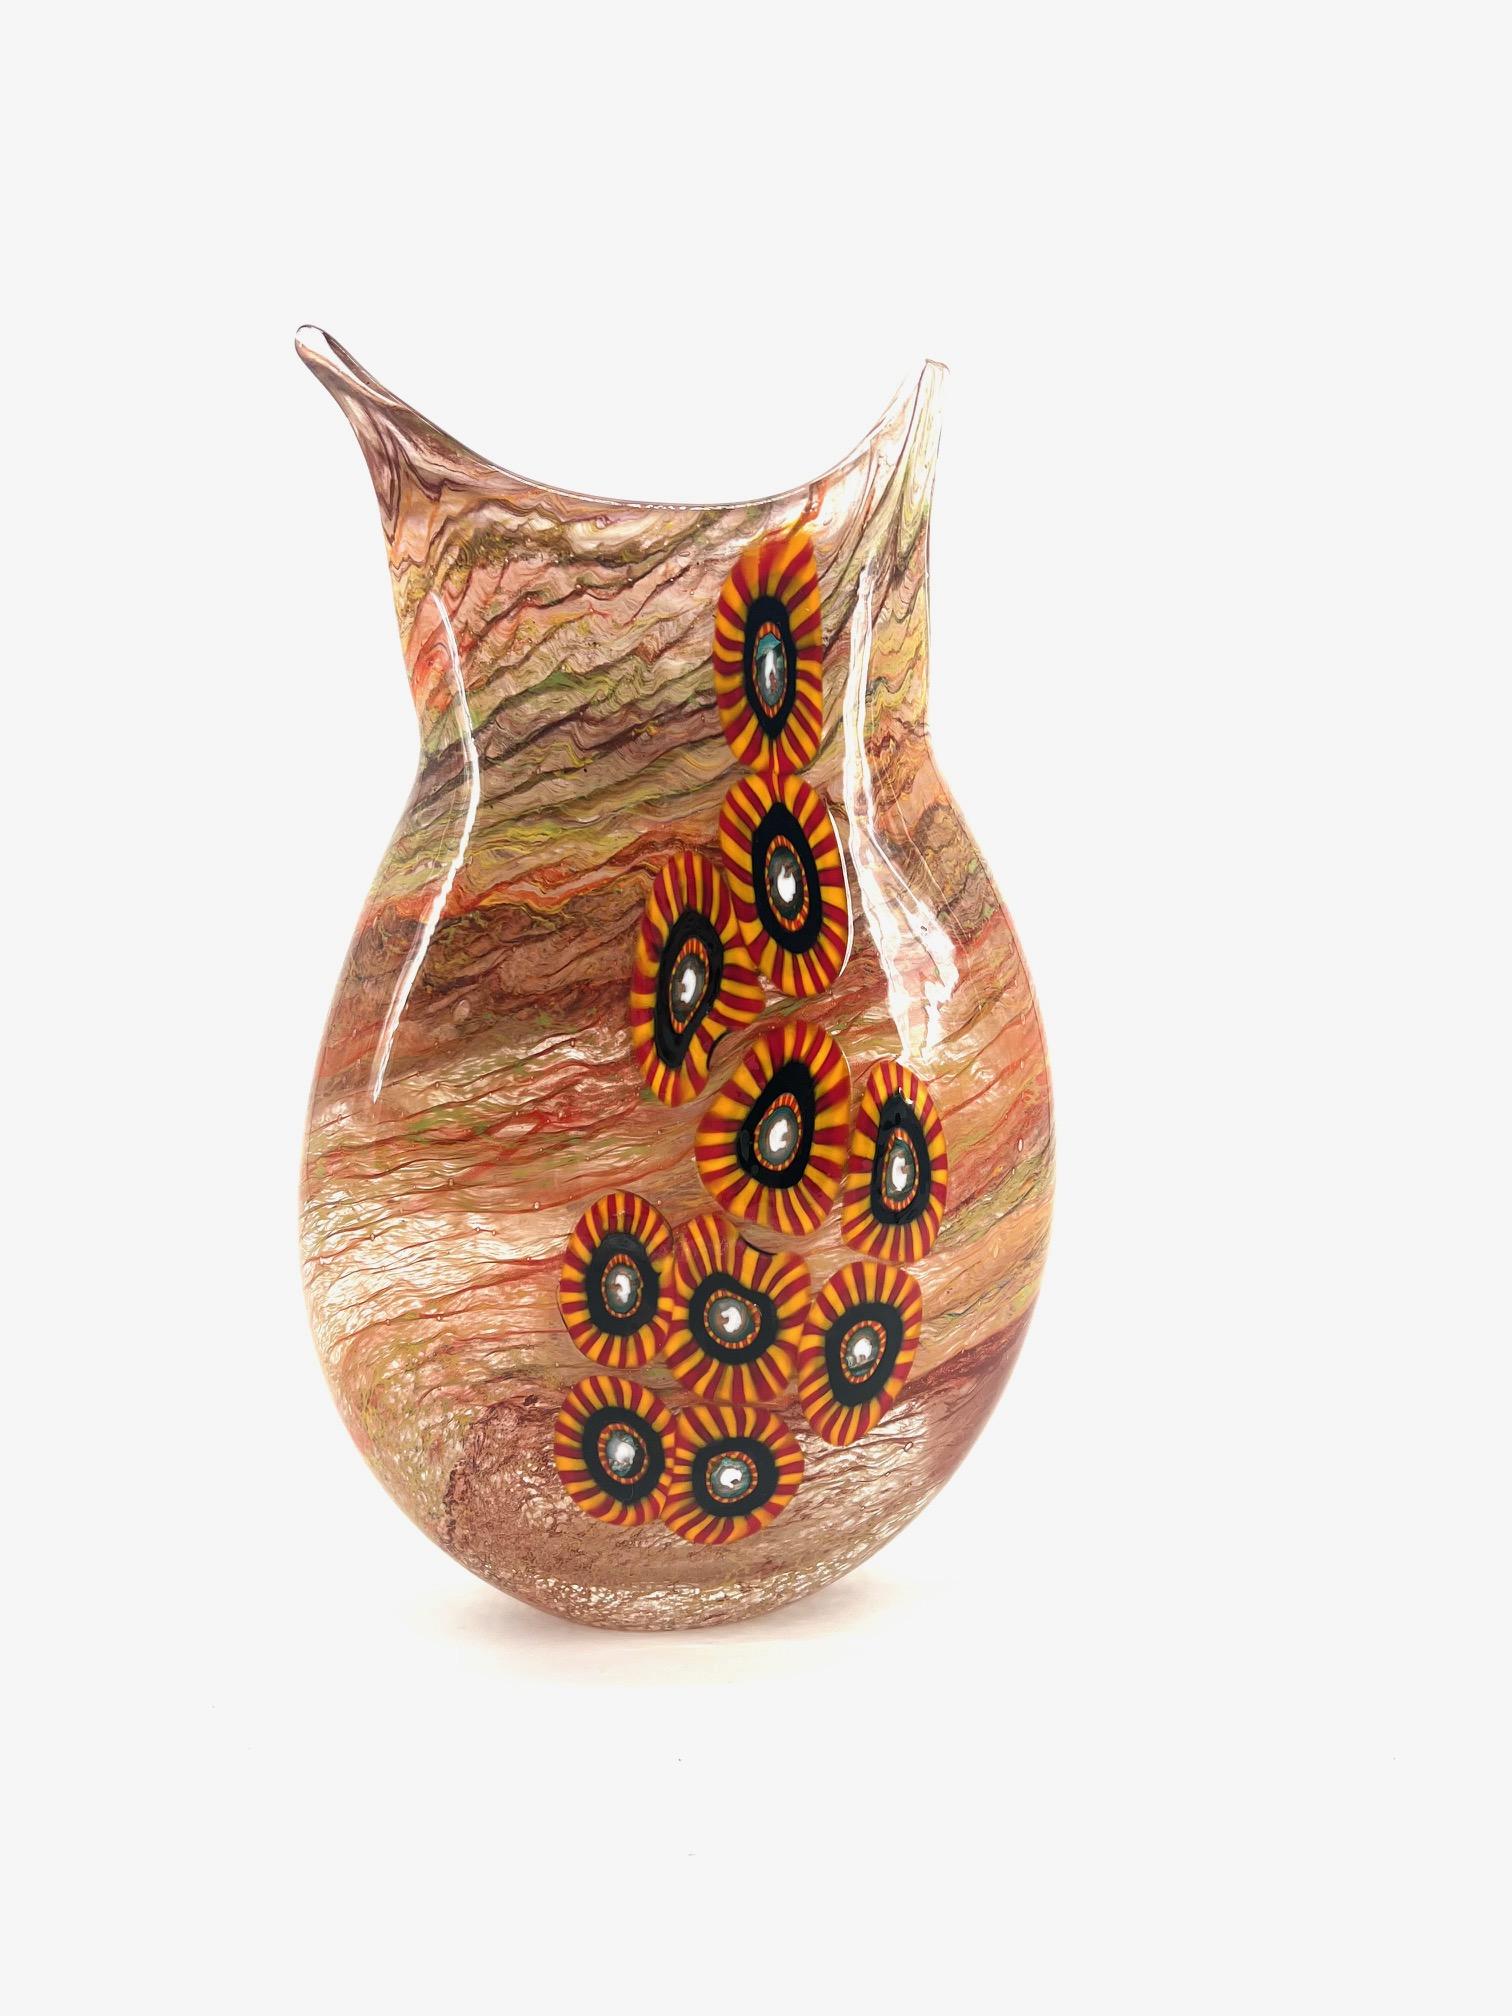 Our aim is the emotion through the creation of murano glass artpieces. 
 
This art-vase is hand made in our murano workshop, our master blowns glass in multicolour nouances and Medallions Murrine to gives to the artpiece nice colours and